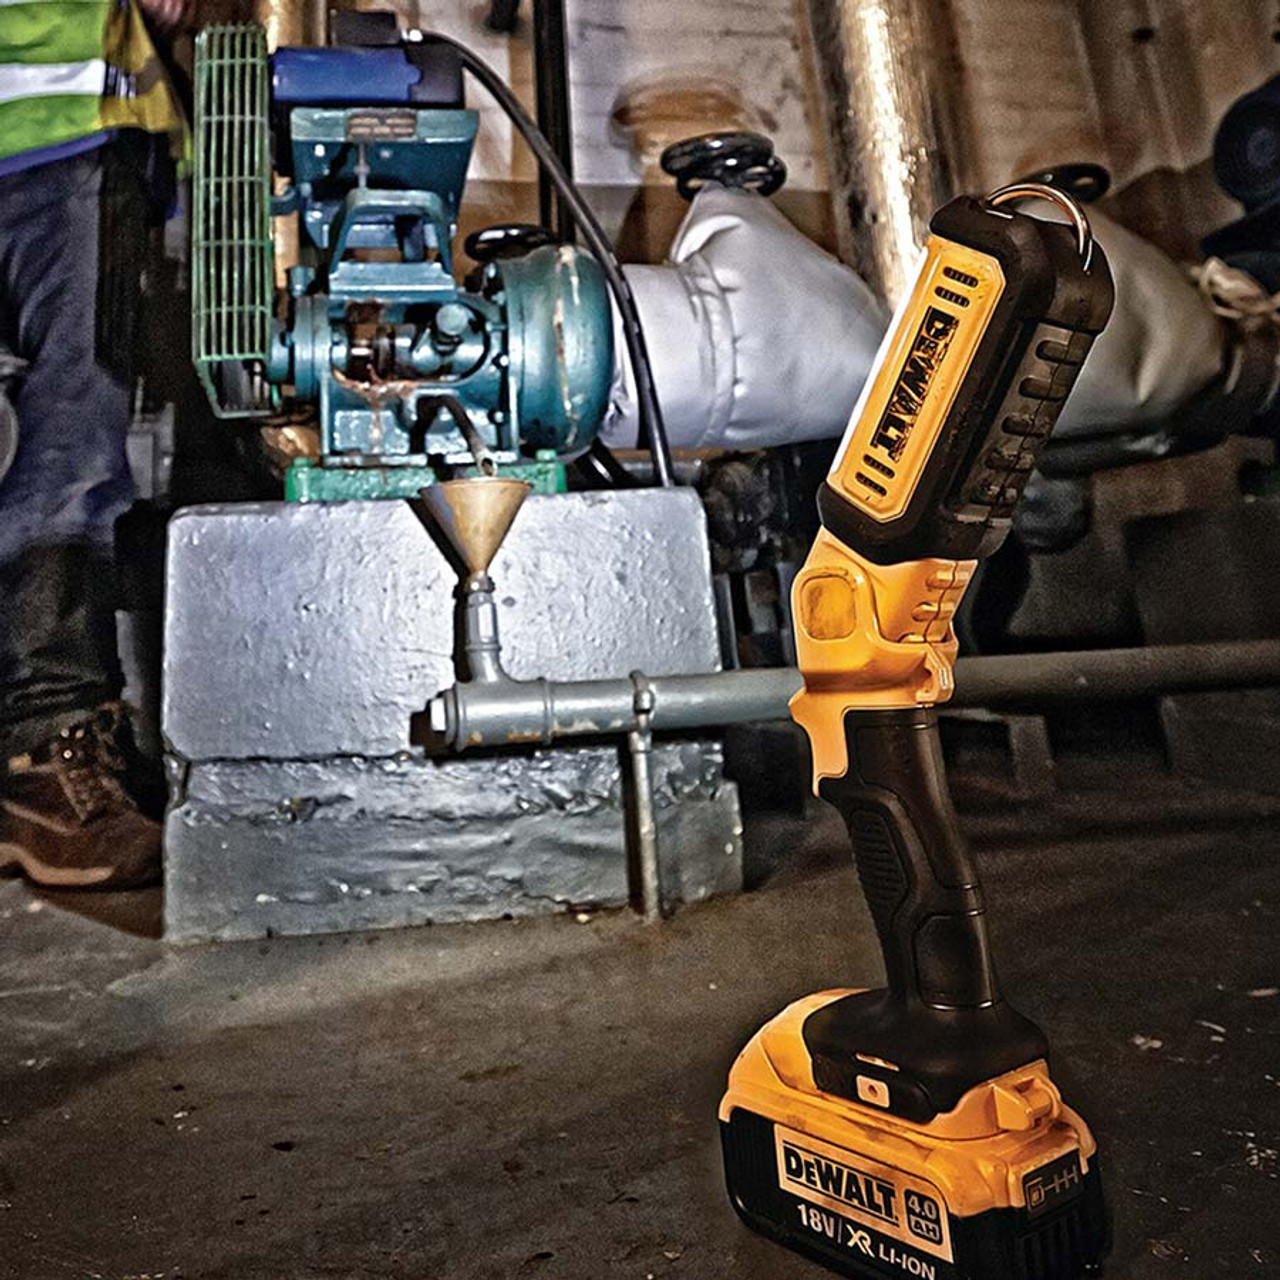 DeWalt hanging hook allows work light to be hands free DCL050-XJ